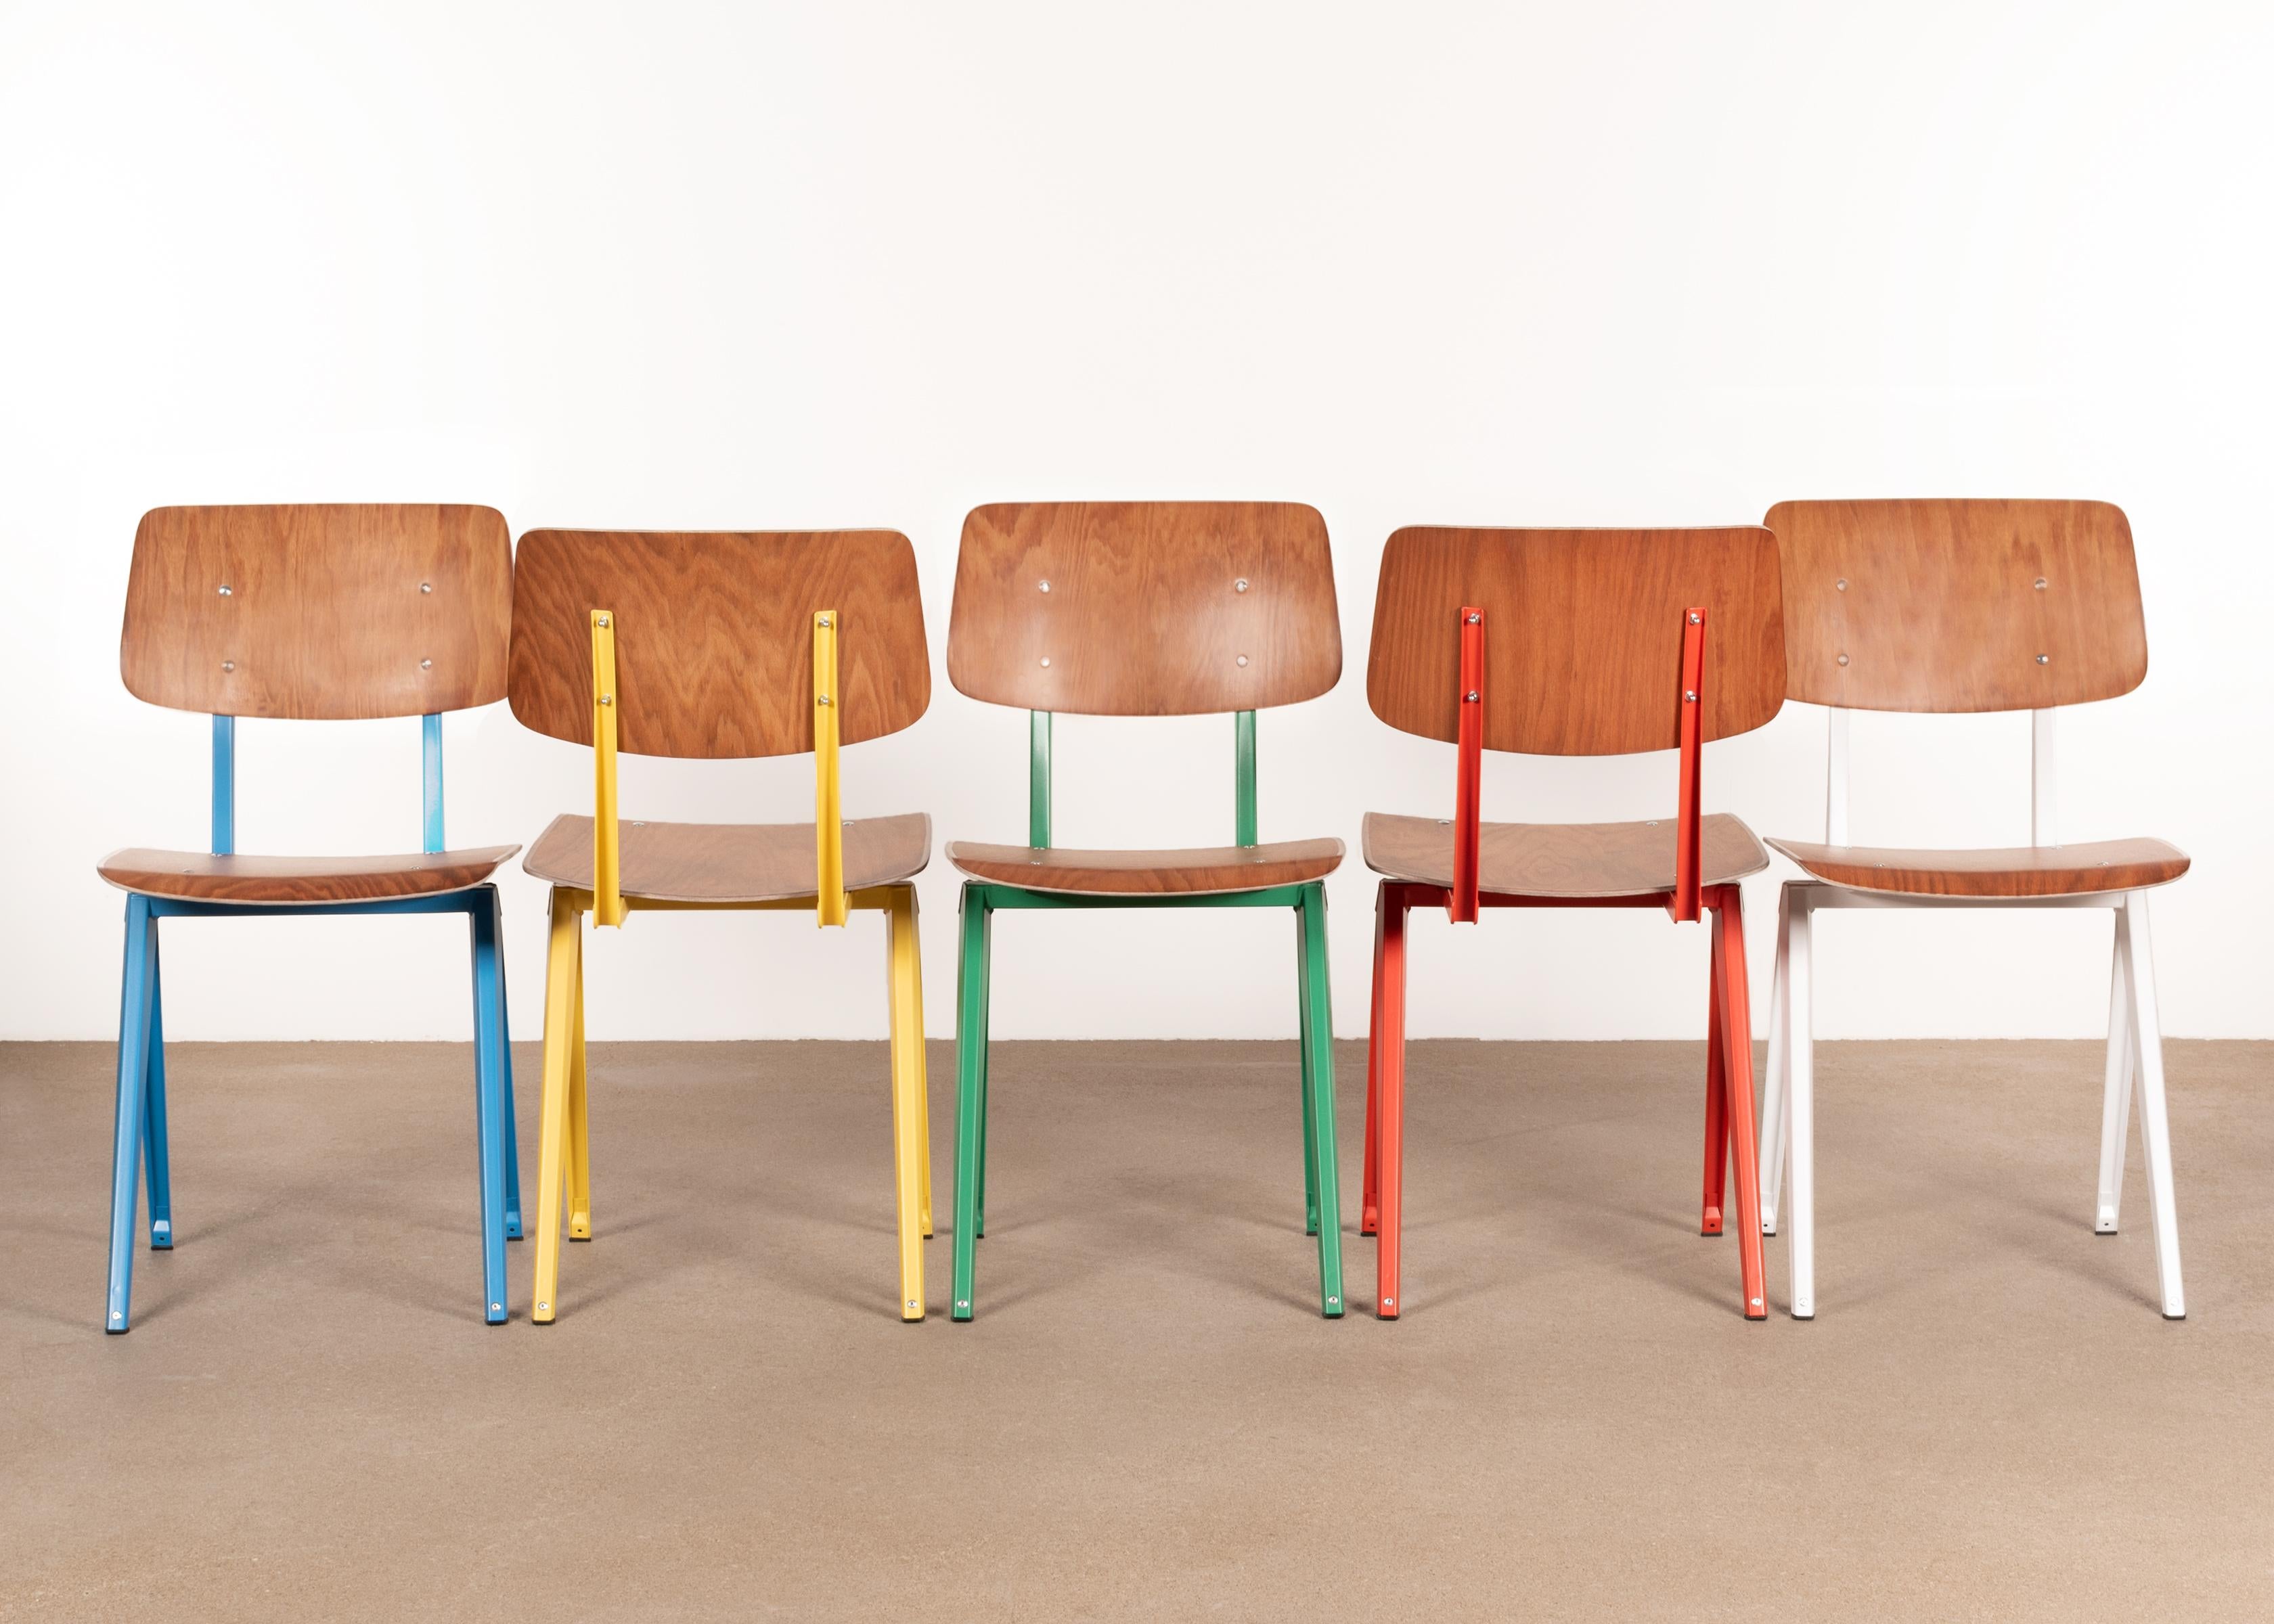 Functional / industrial Galvanitas S16 plywood chairs in the style of Prouvé. Frames are made of folded sheet steel and seat / backpanel of resin plywood. Various colors, quantities and bespoke service available. In stock and ready to ship worldwide